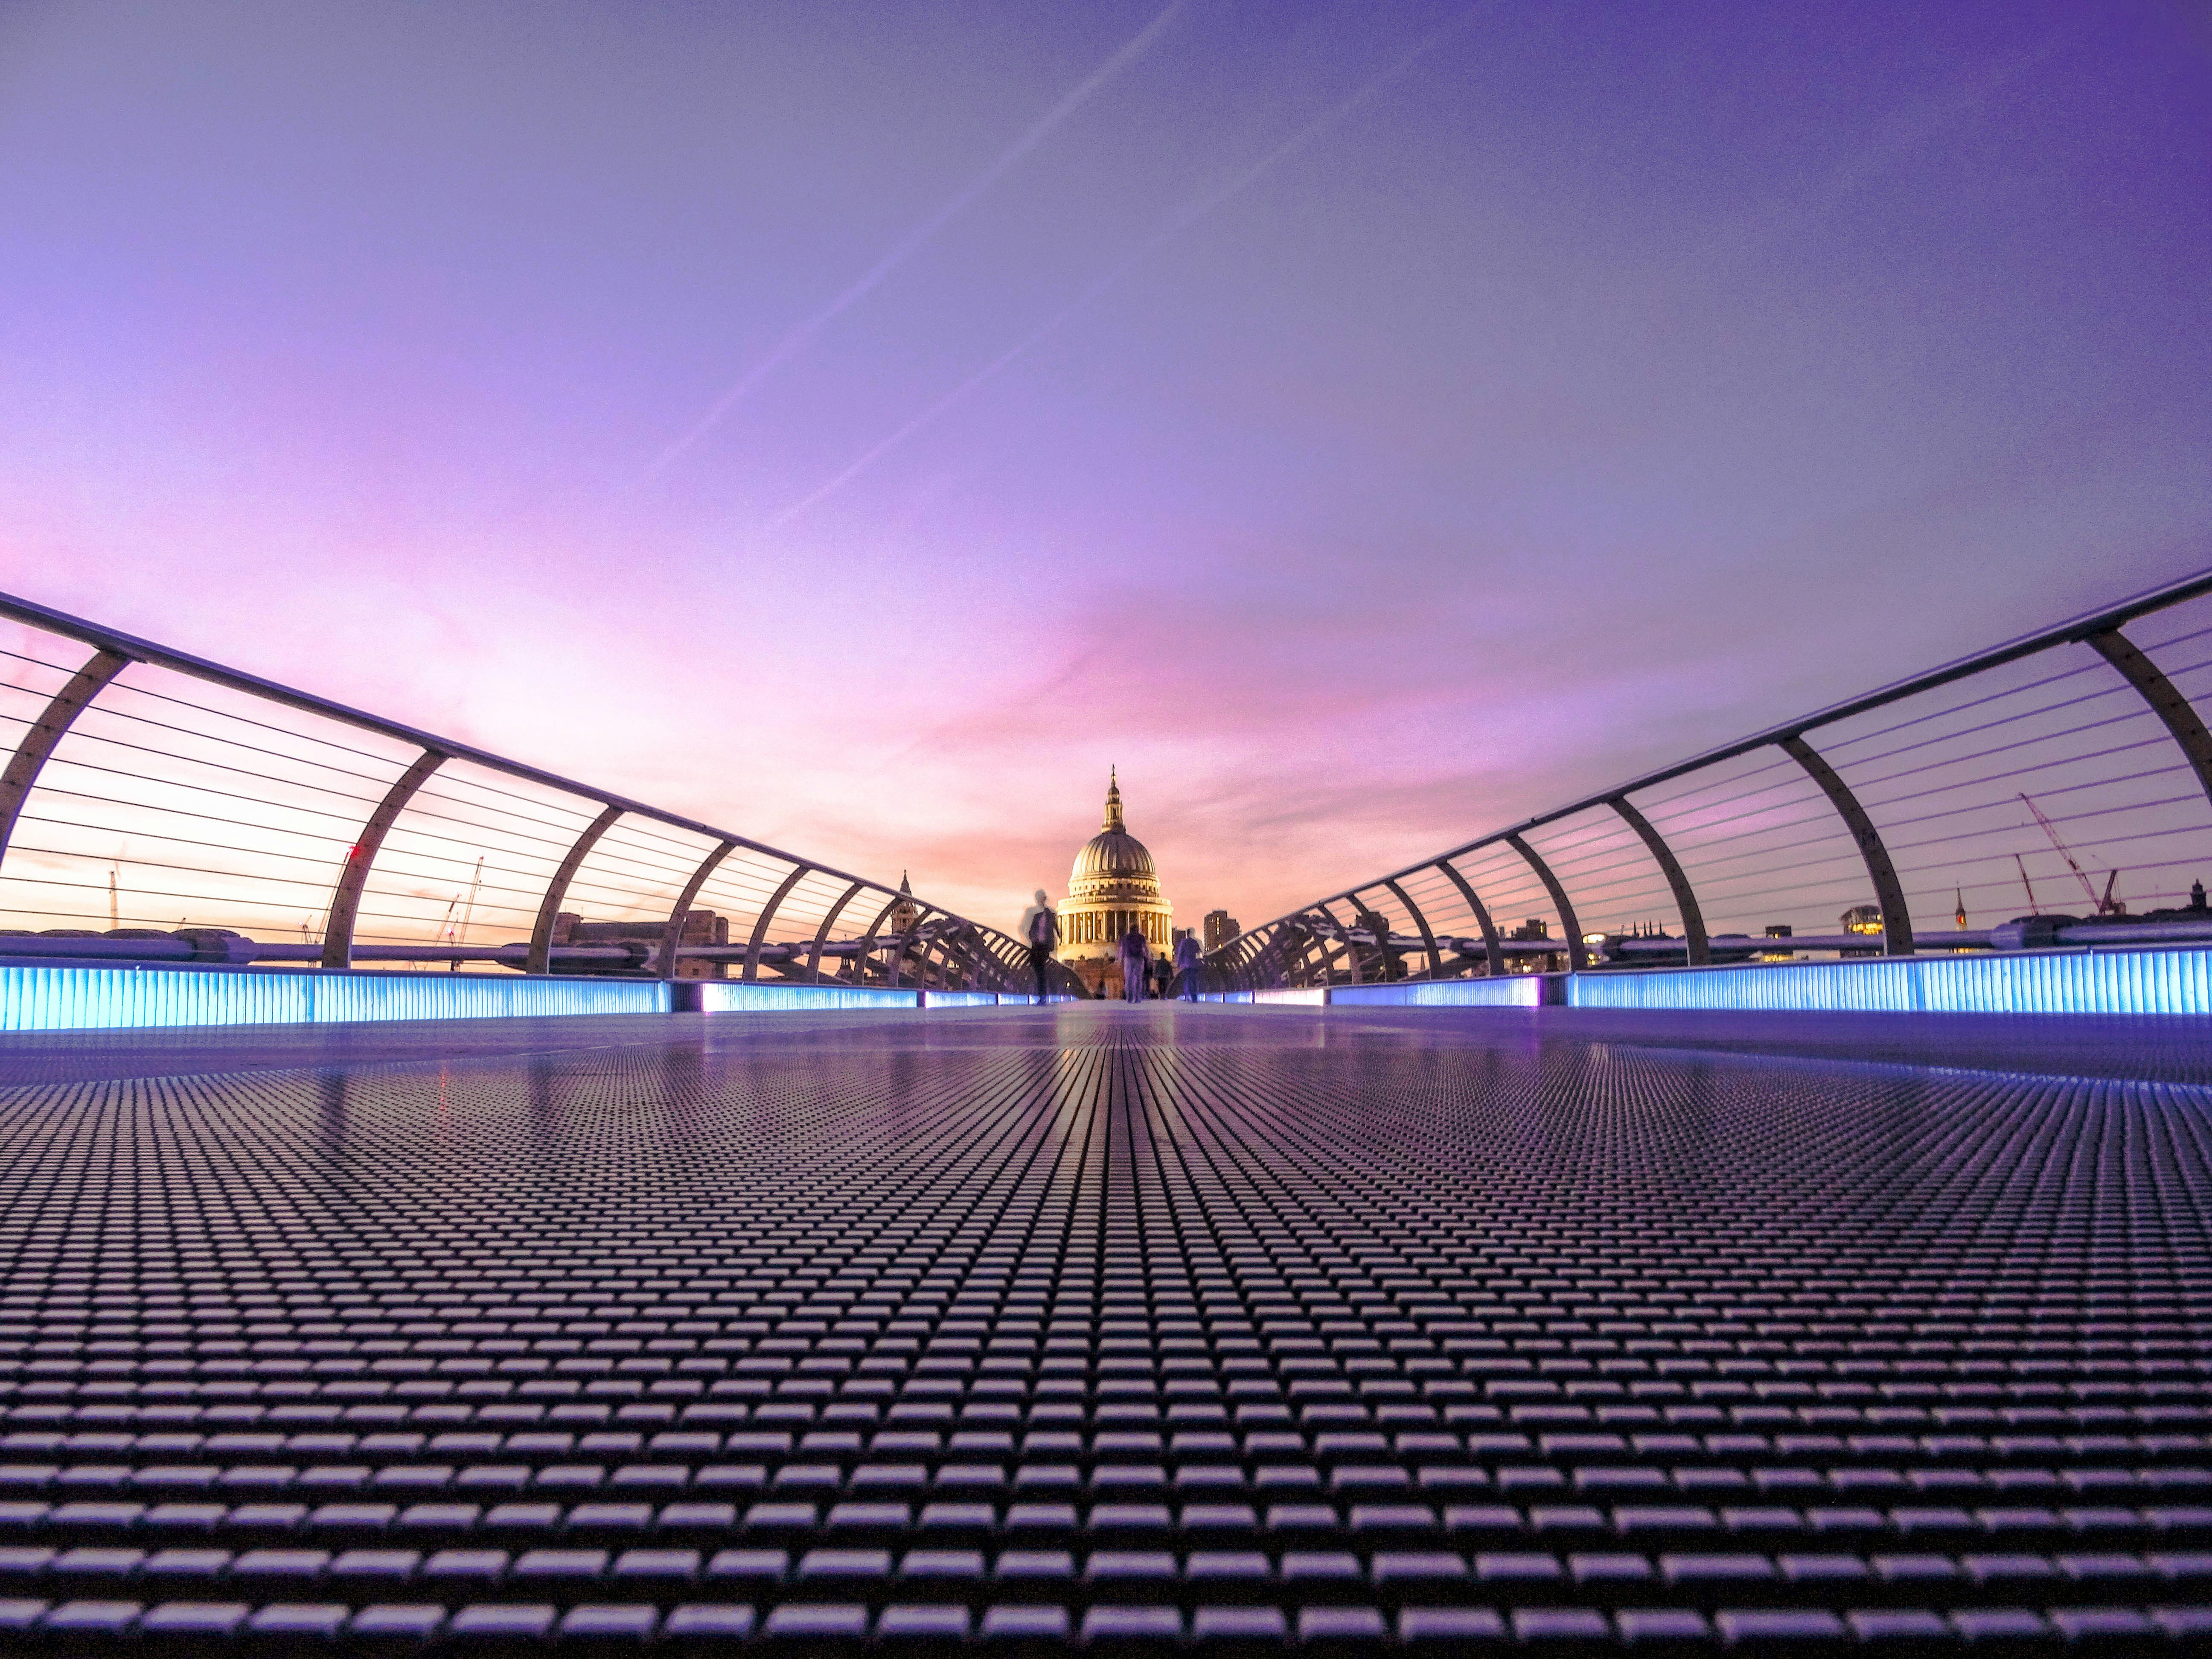 A view of St. Paul's Cathedral from the Millennium Bridge in London